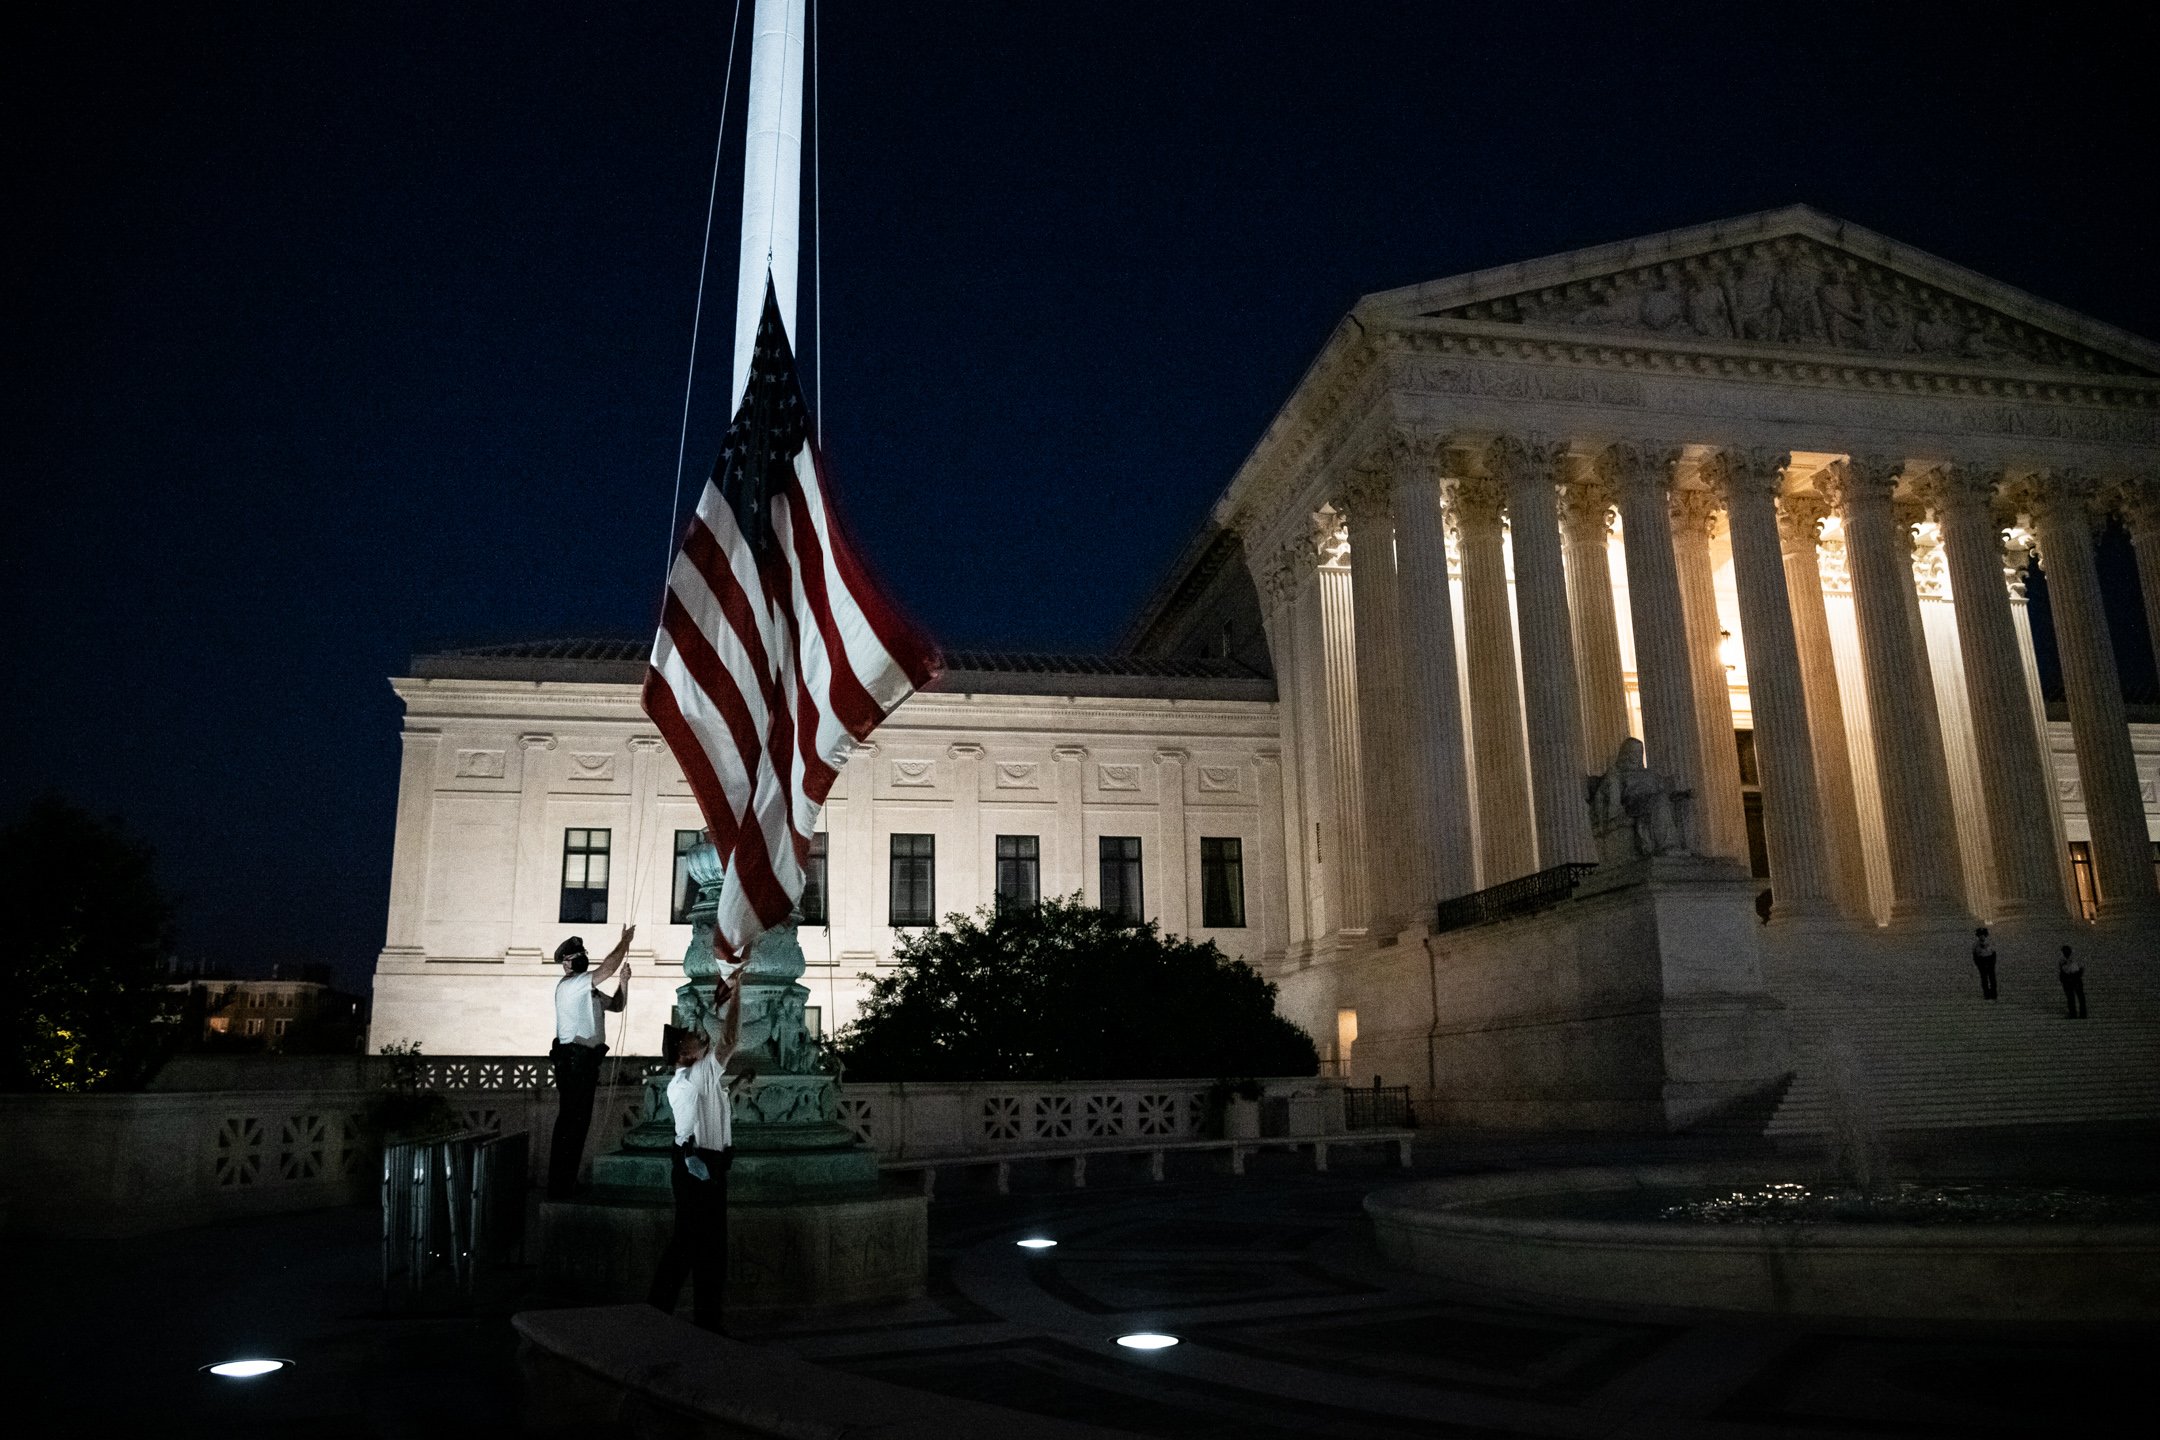  Police officers lower the American flag to half staff outside the U.S. Supreme Court, moments after the passing of Justice Ruth Bader Ginsburg at the age of 87, in Washington, D.C., on September 18, 2020. (Graeme Sloan/Sipa USA) 